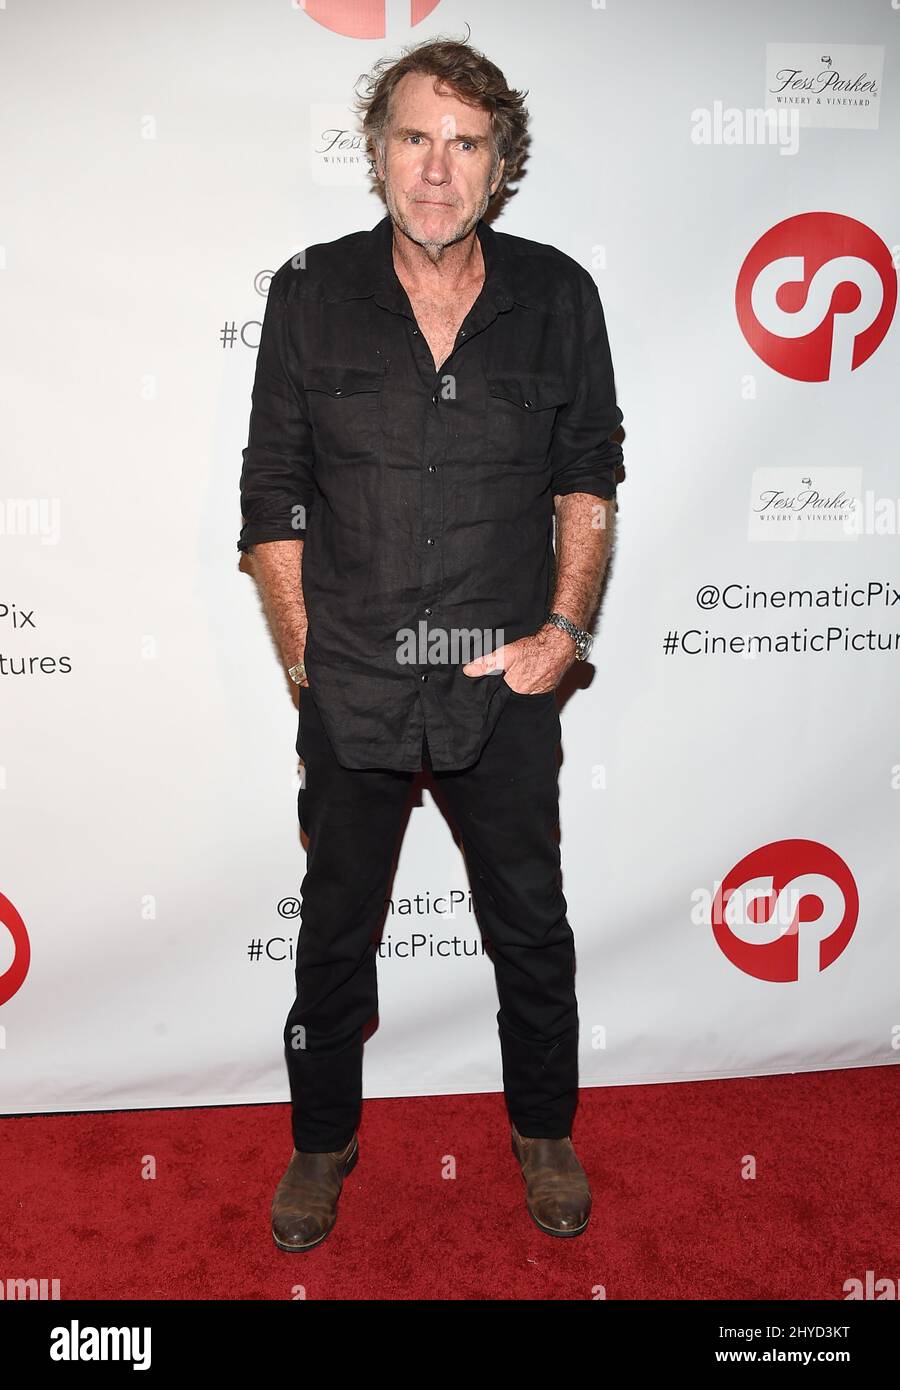 Robert Taylor attending Longmire A Cinematic Pictures Book Launch held at the Cinematic Pictures Gallery in Los Angeles, USA Stock Photo